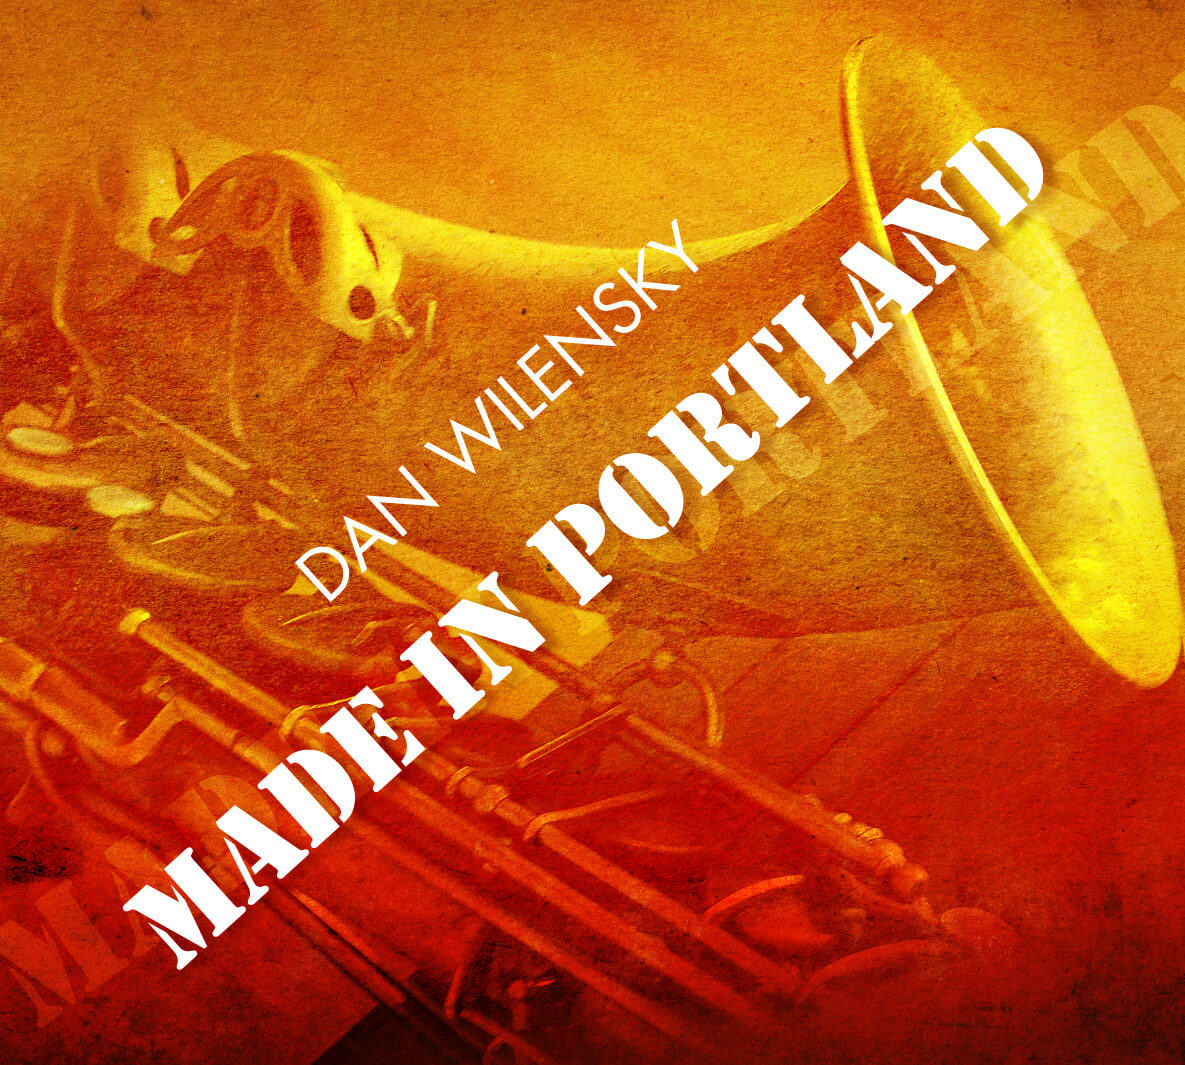 A picture of the cover art for dan wilensky 's made in portland.